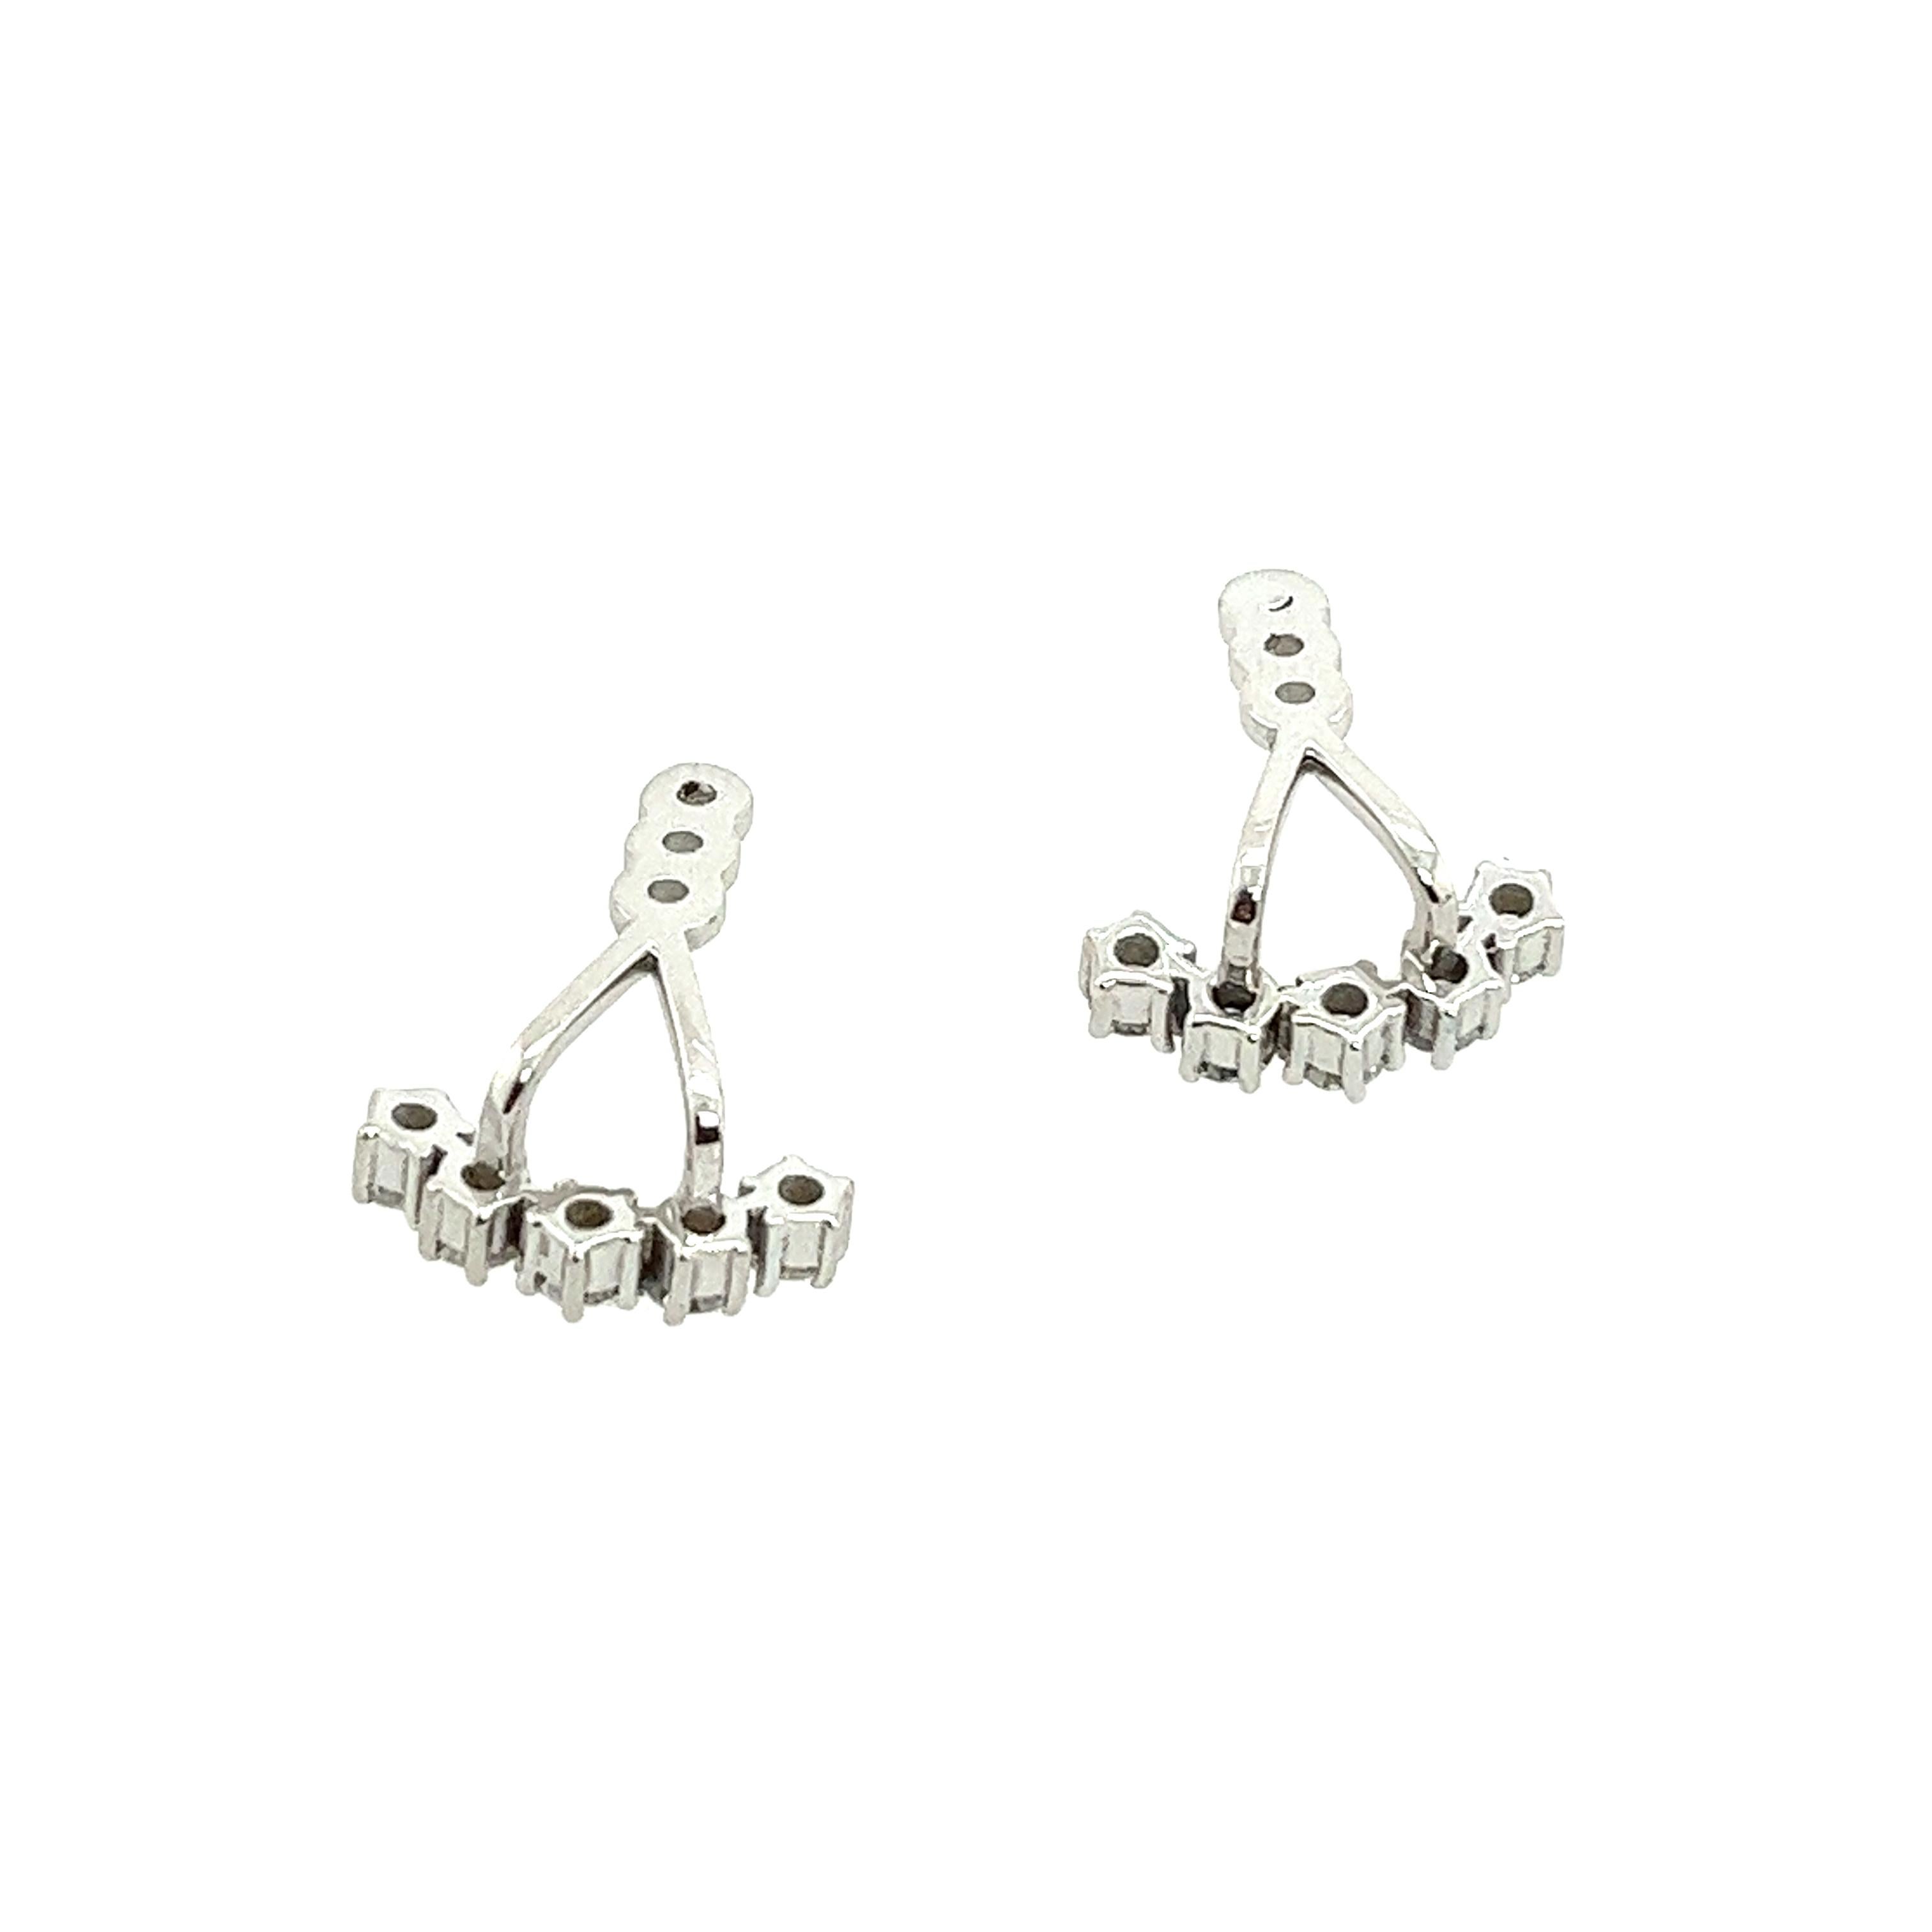 This earring jackets fit behind any stud earring, are set with 5 round brilliant cut diamonds in each earring, with total diamond weight 0.40ct. Set in 14ct white gold. The earrings are stylish and perfect for everyday wear.
Total Diamond Weight: